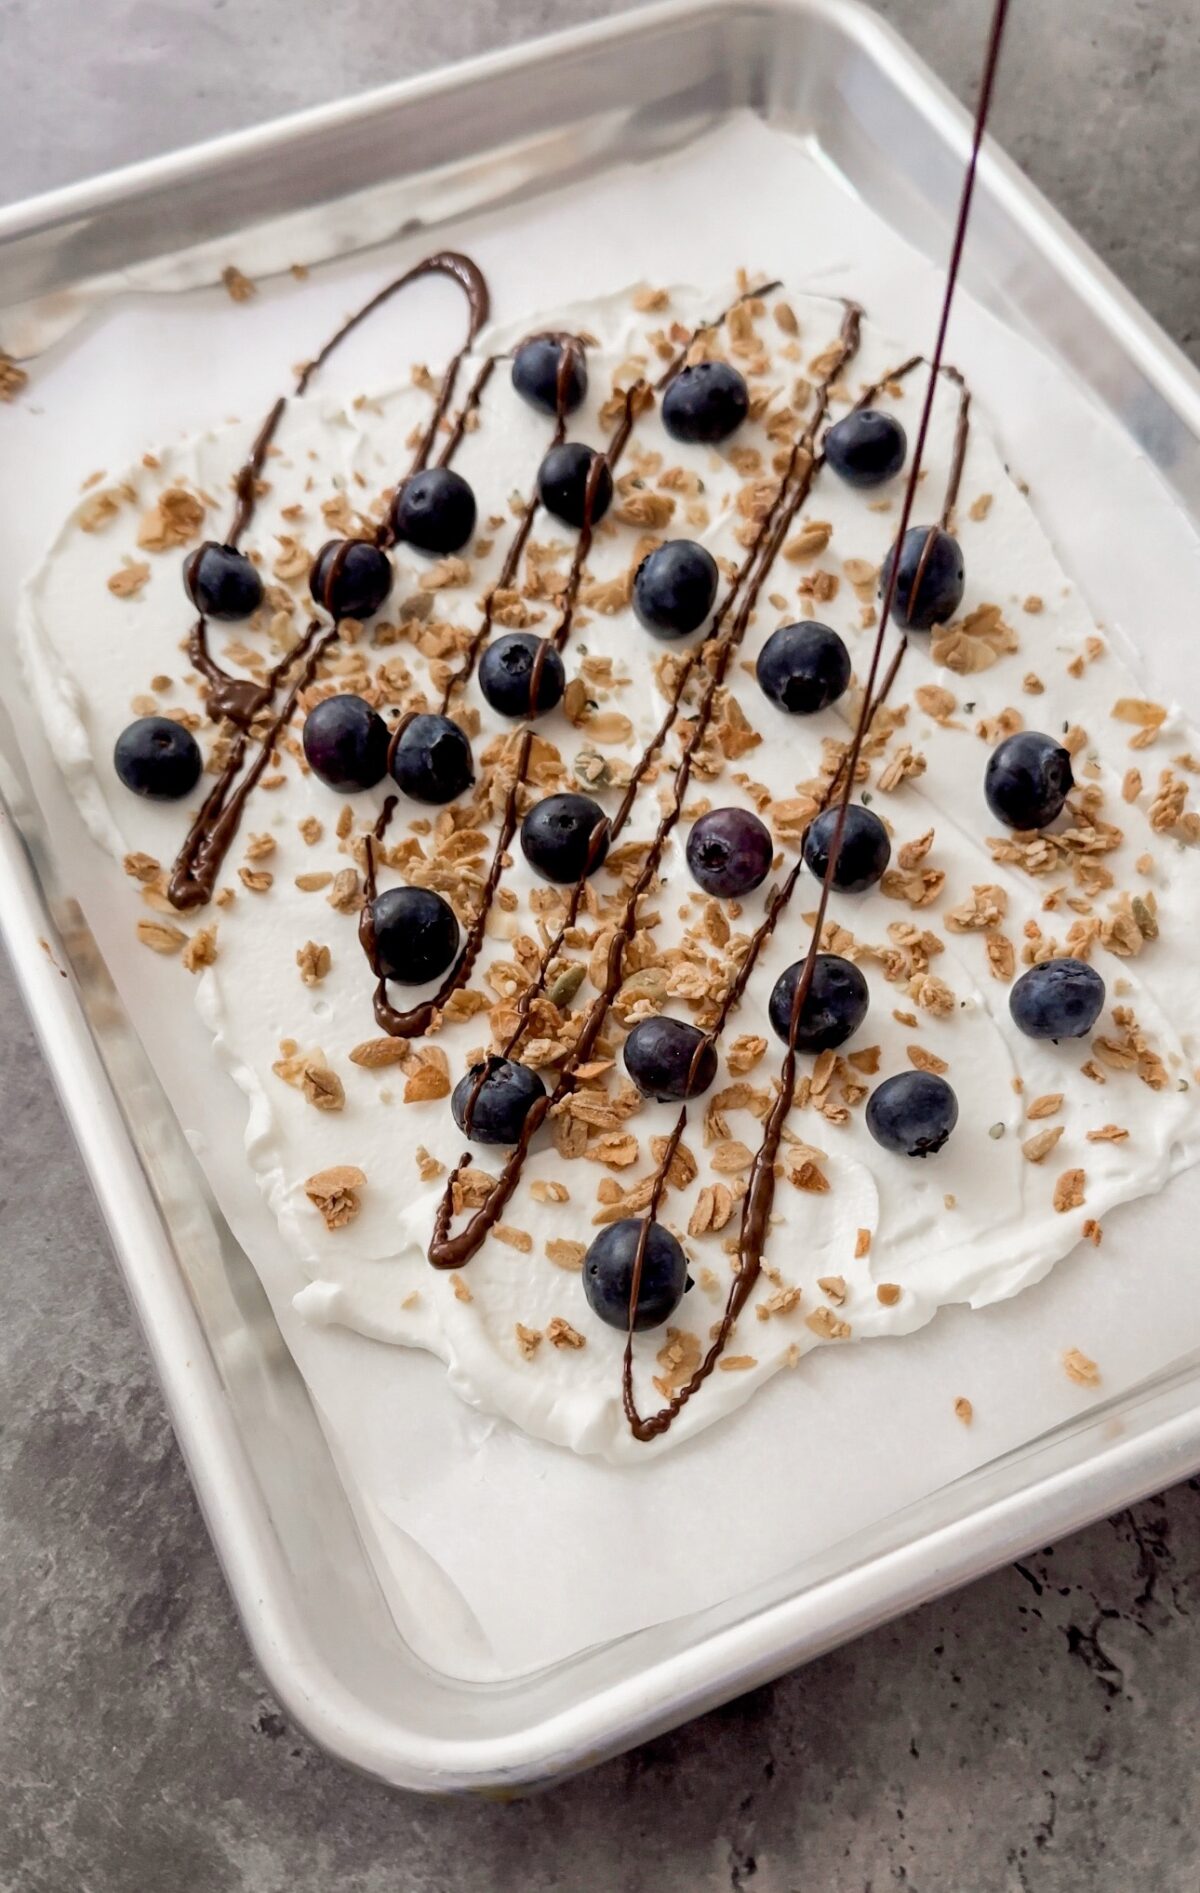 chocolate being drizzled on yogurt spread over baking sheet
